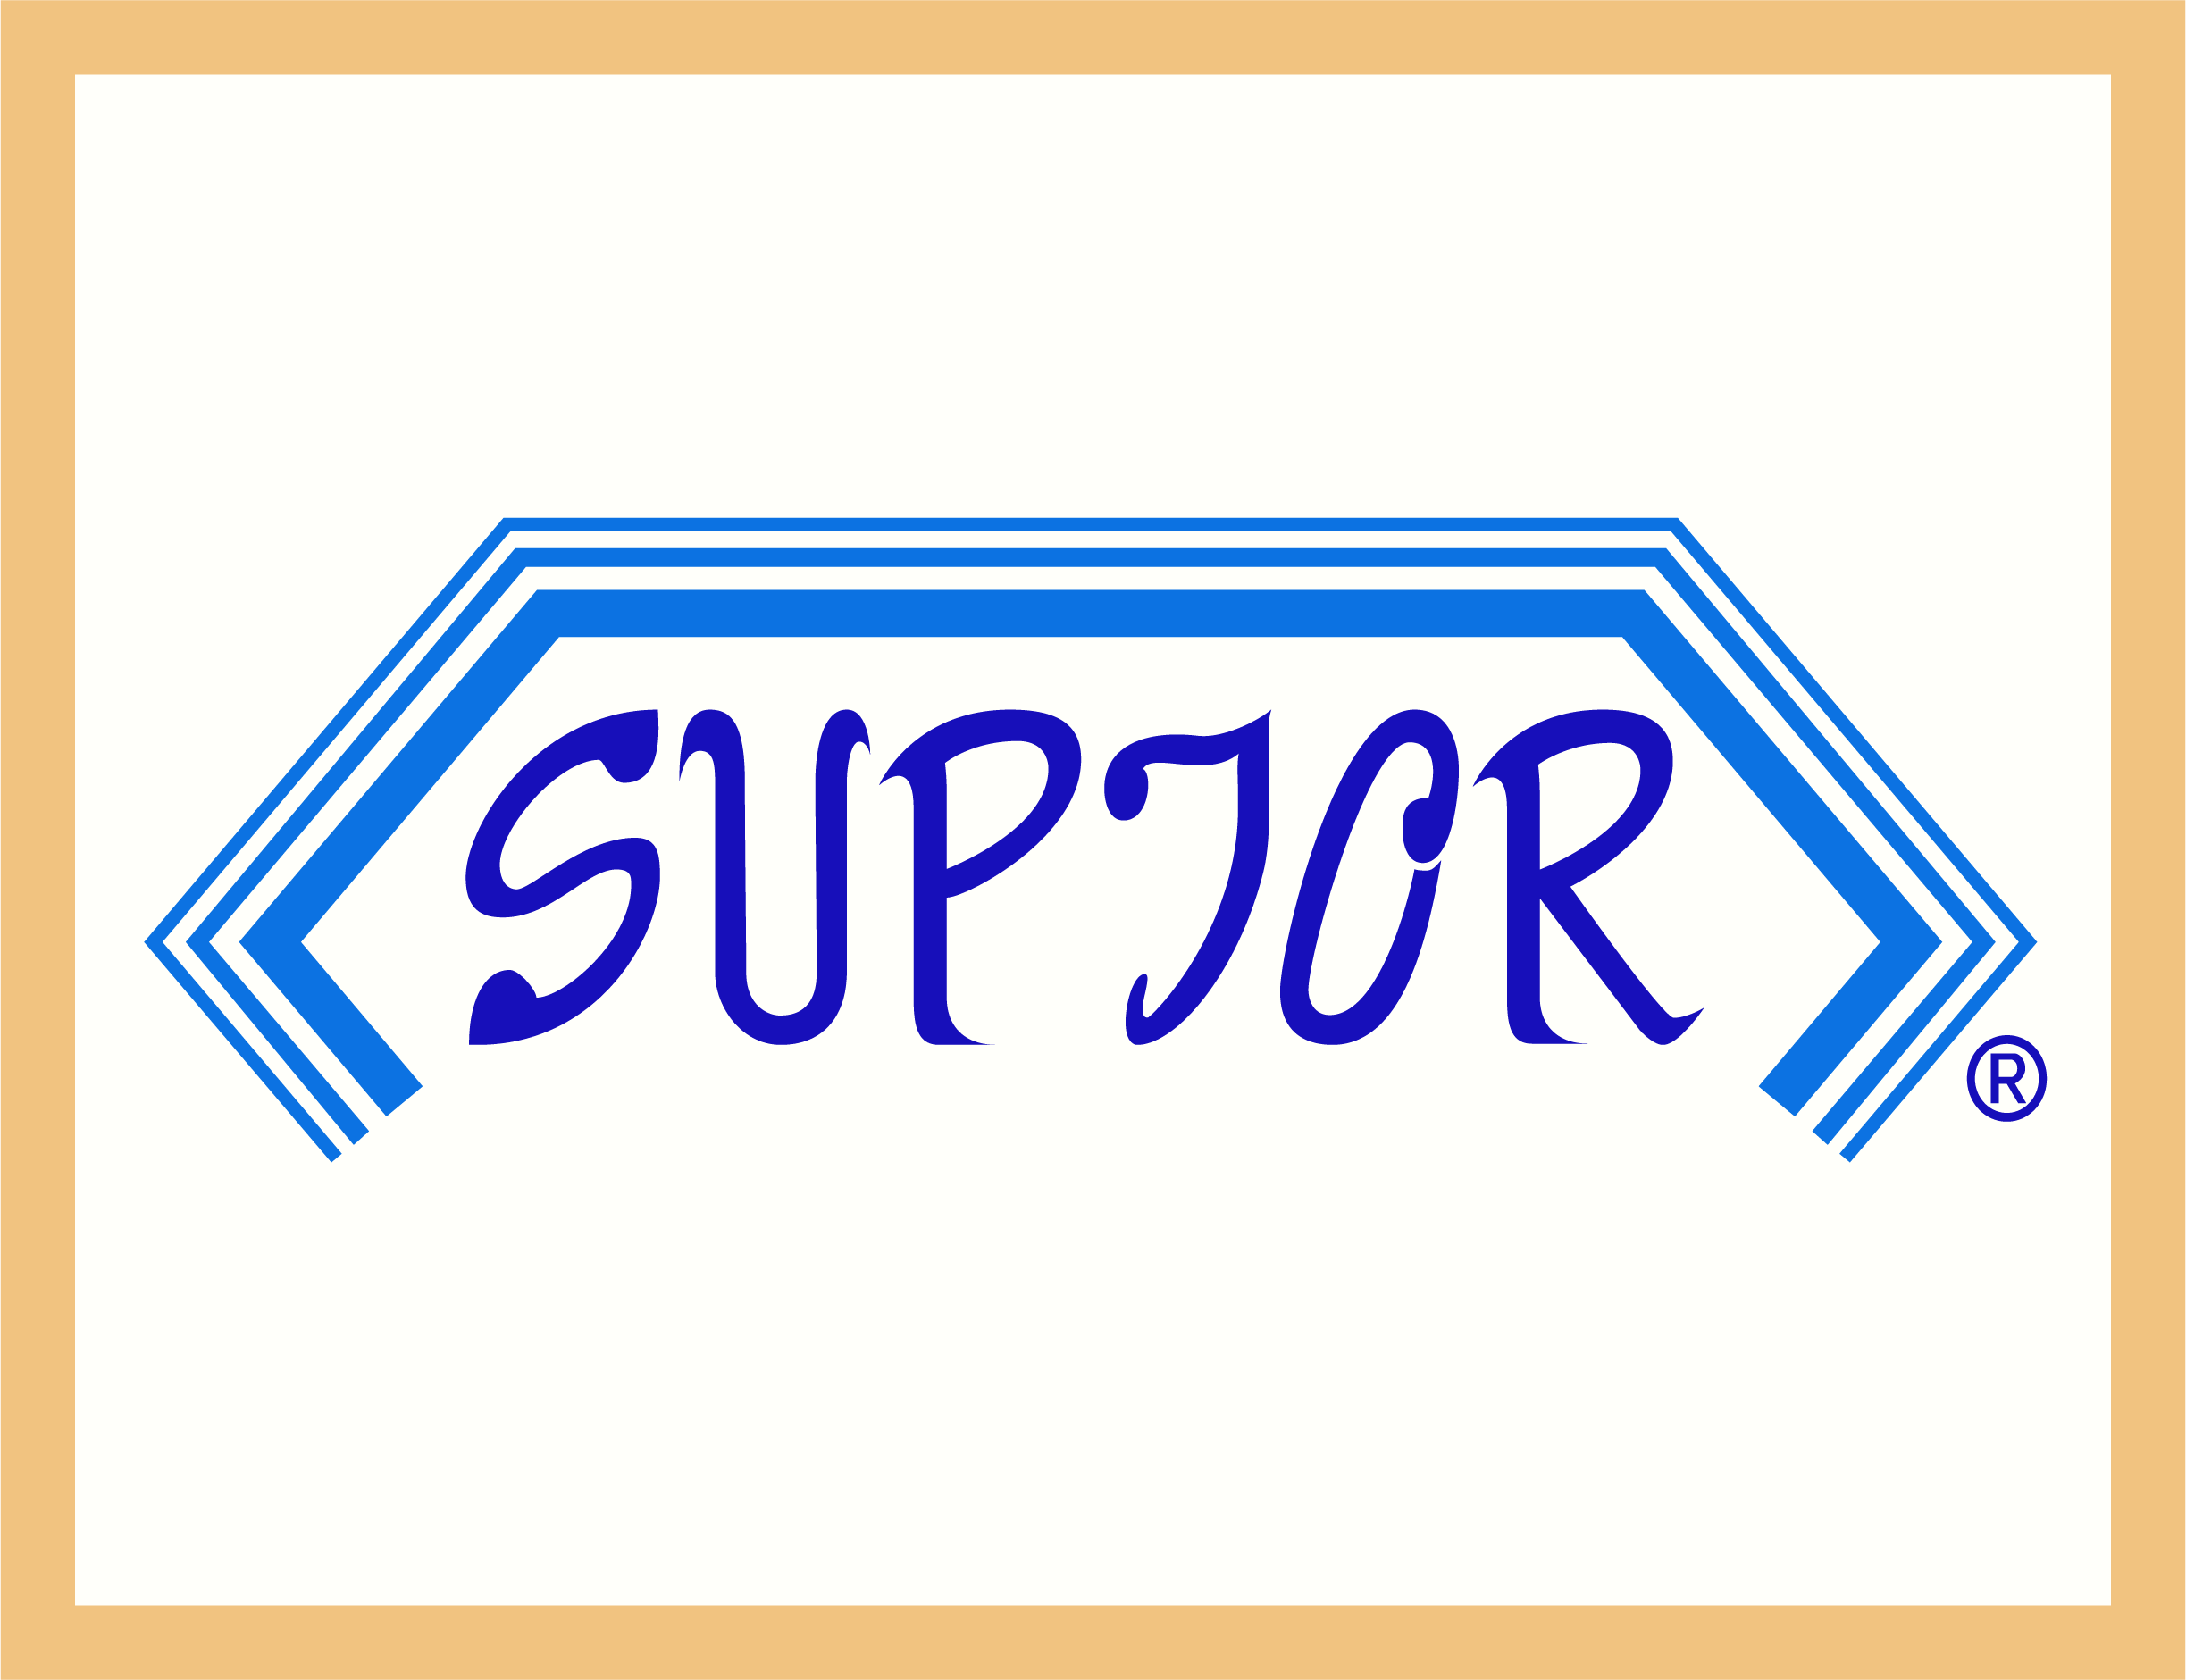 Logo of SUPTOR - the research product that is the 'supply effectiveness assessor'